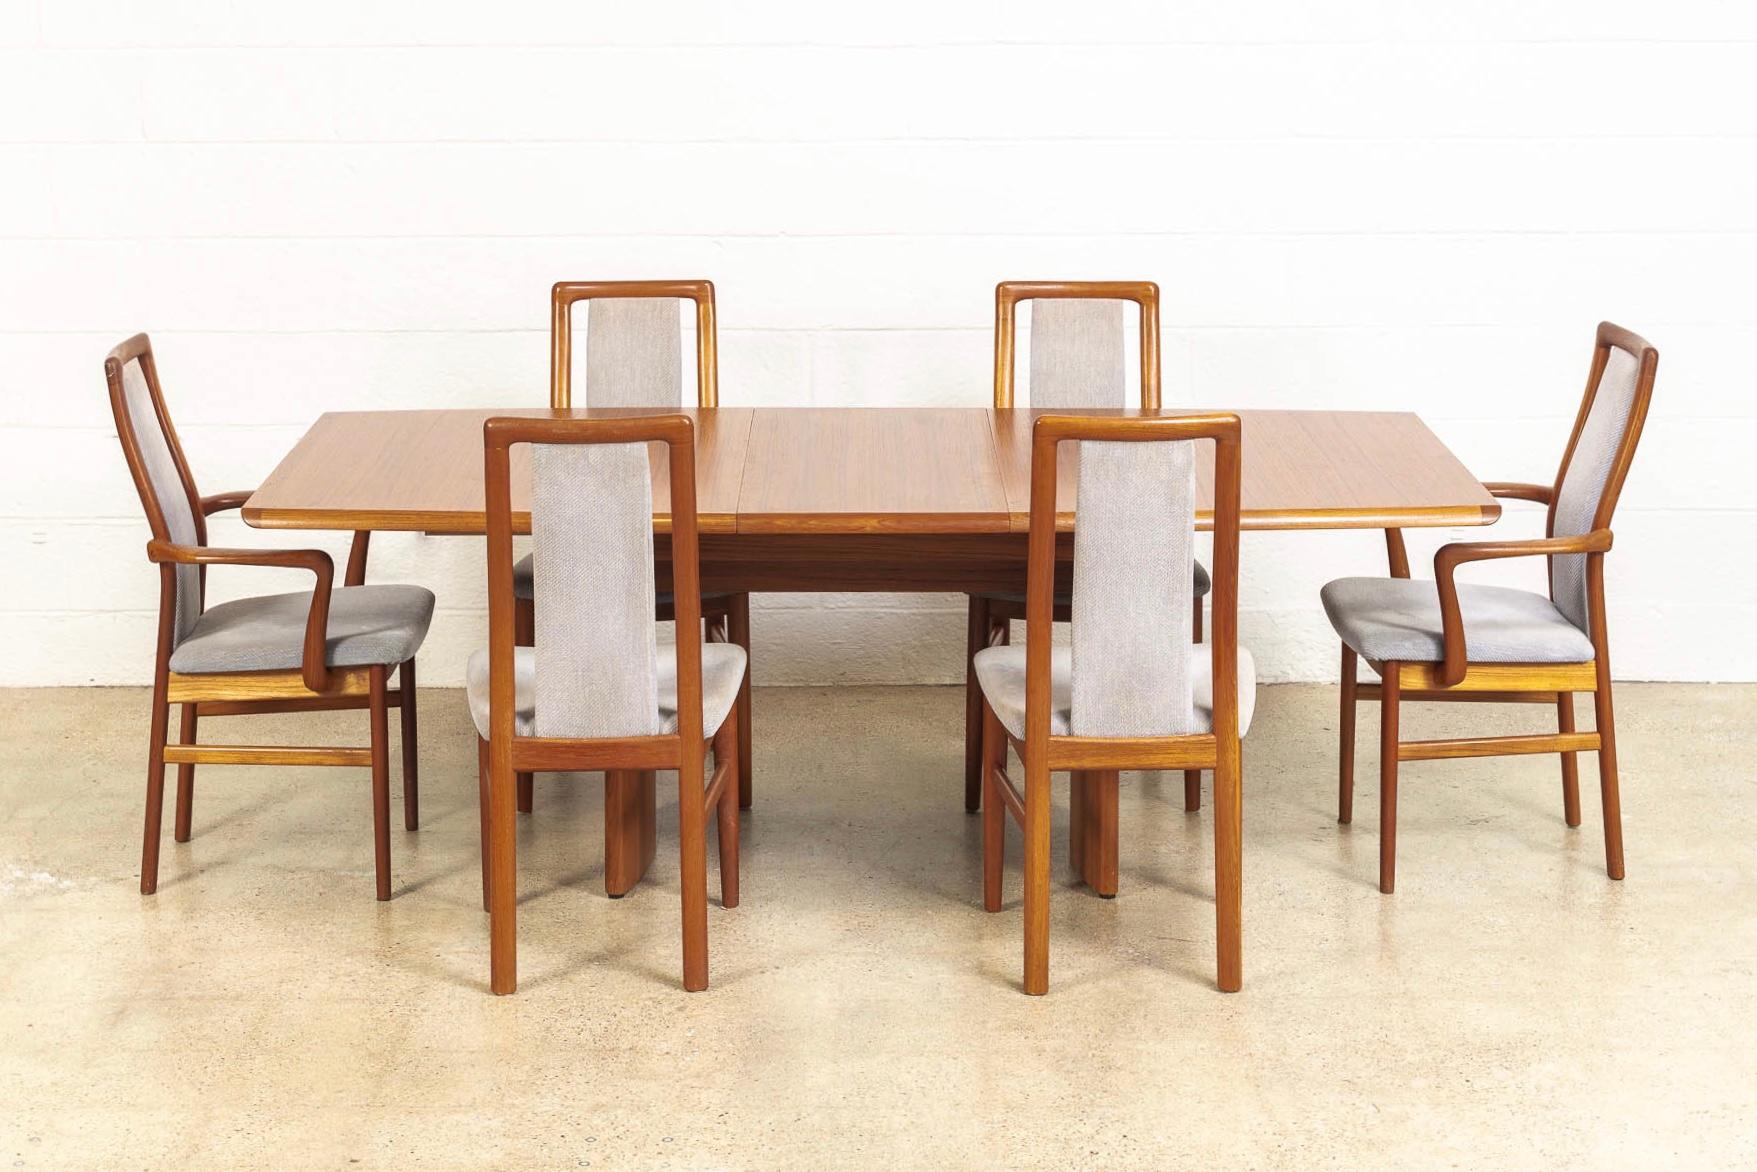 This vintage Mid-century Danish modern dining set includes six teak upholstered dining chairs and a teak expandable dining table made in Denmark by Vejle Stole O.G. Moebelfabrik, circa 1960. The set has an elegant Minimalist aesthetic and a clean,